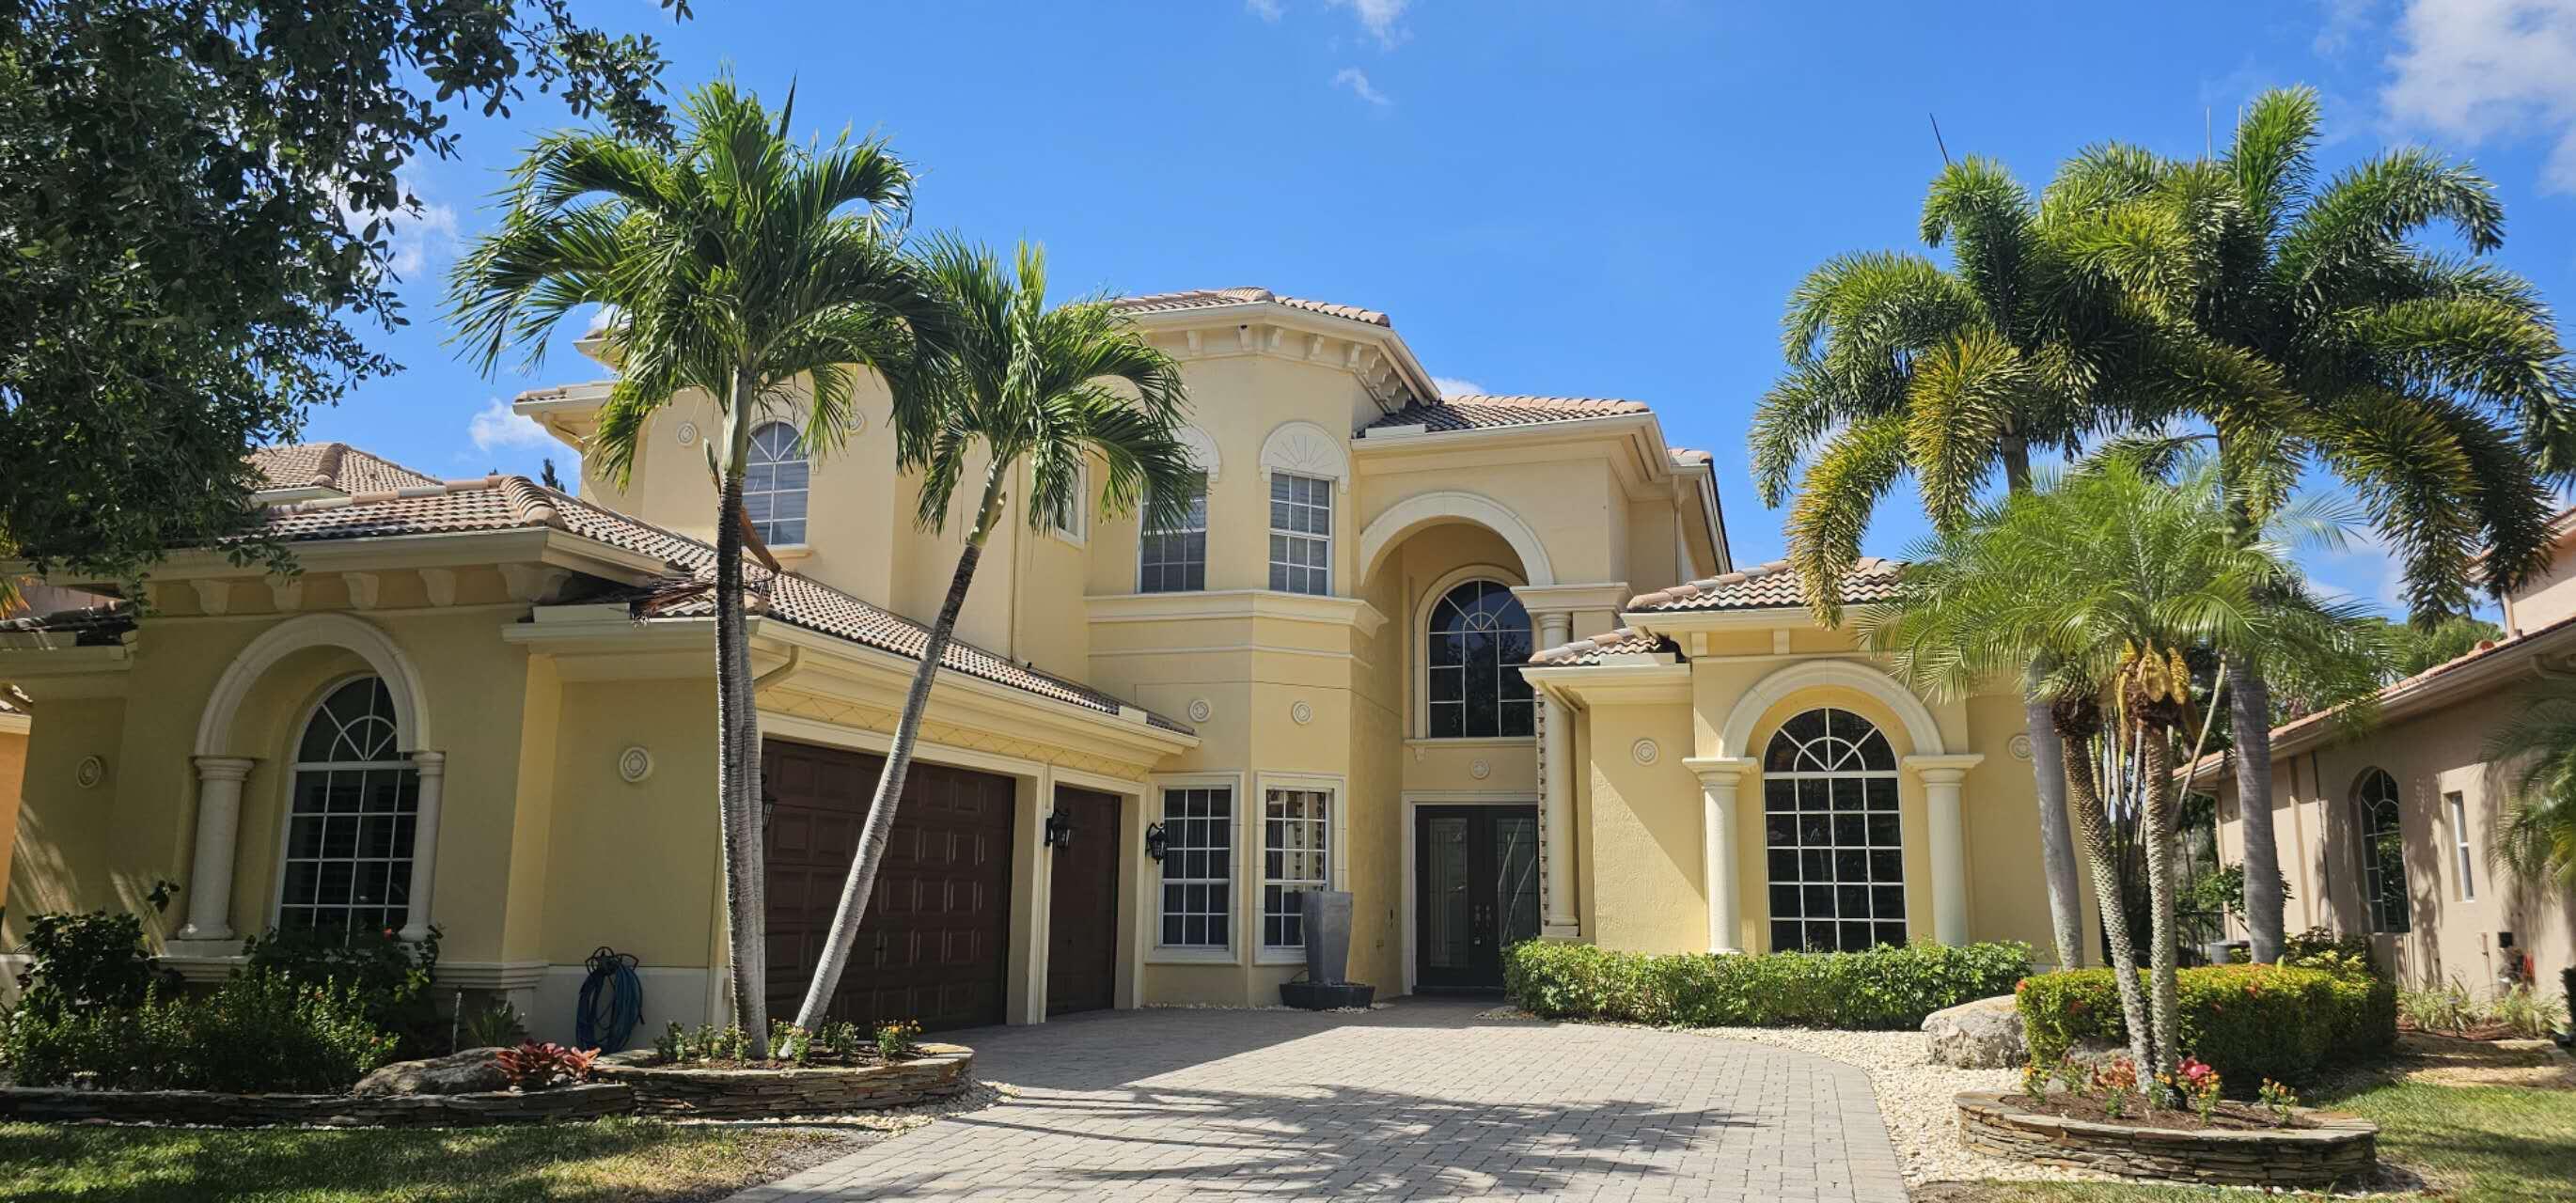 Property for Sale at 520 Edgebrook Lane, Royal Palm Beach, Palm Beach County, Florida - Bedrooms: 5 
Bathrooms: 4.5  - $1,110,000